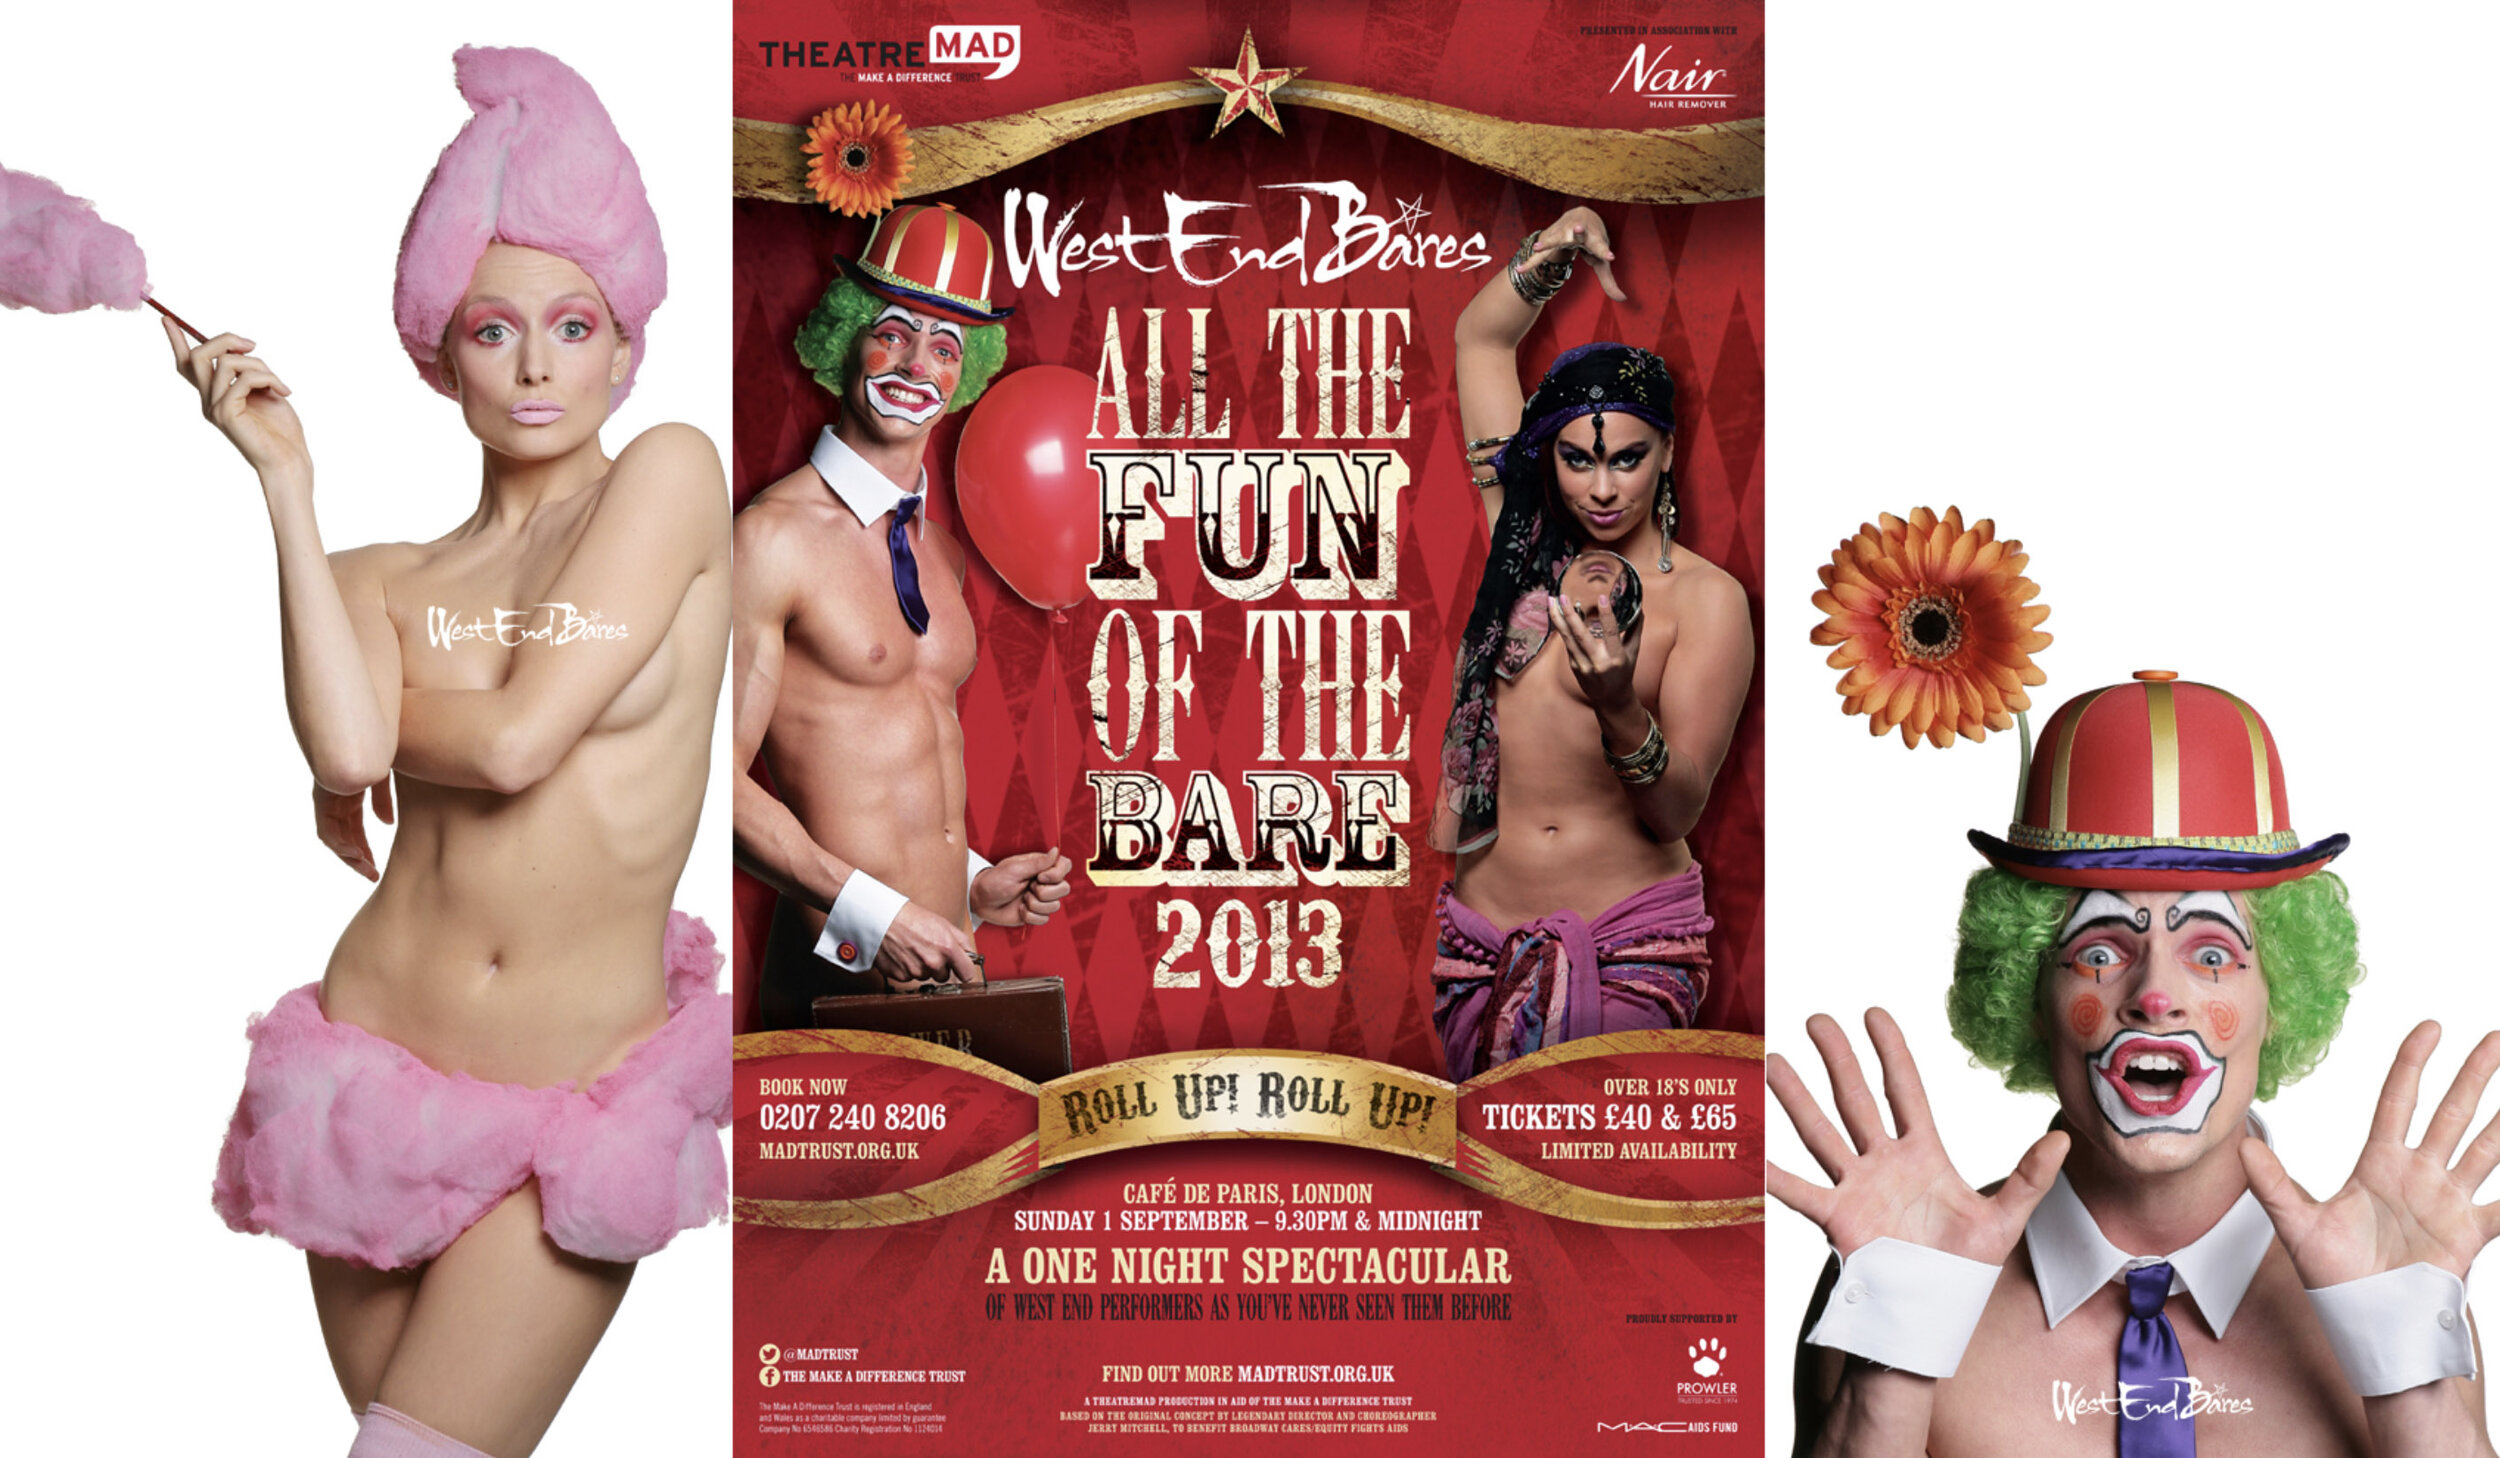 West End Bares show promo - All the Fun of the Bare. shot at the Cafe de Paris